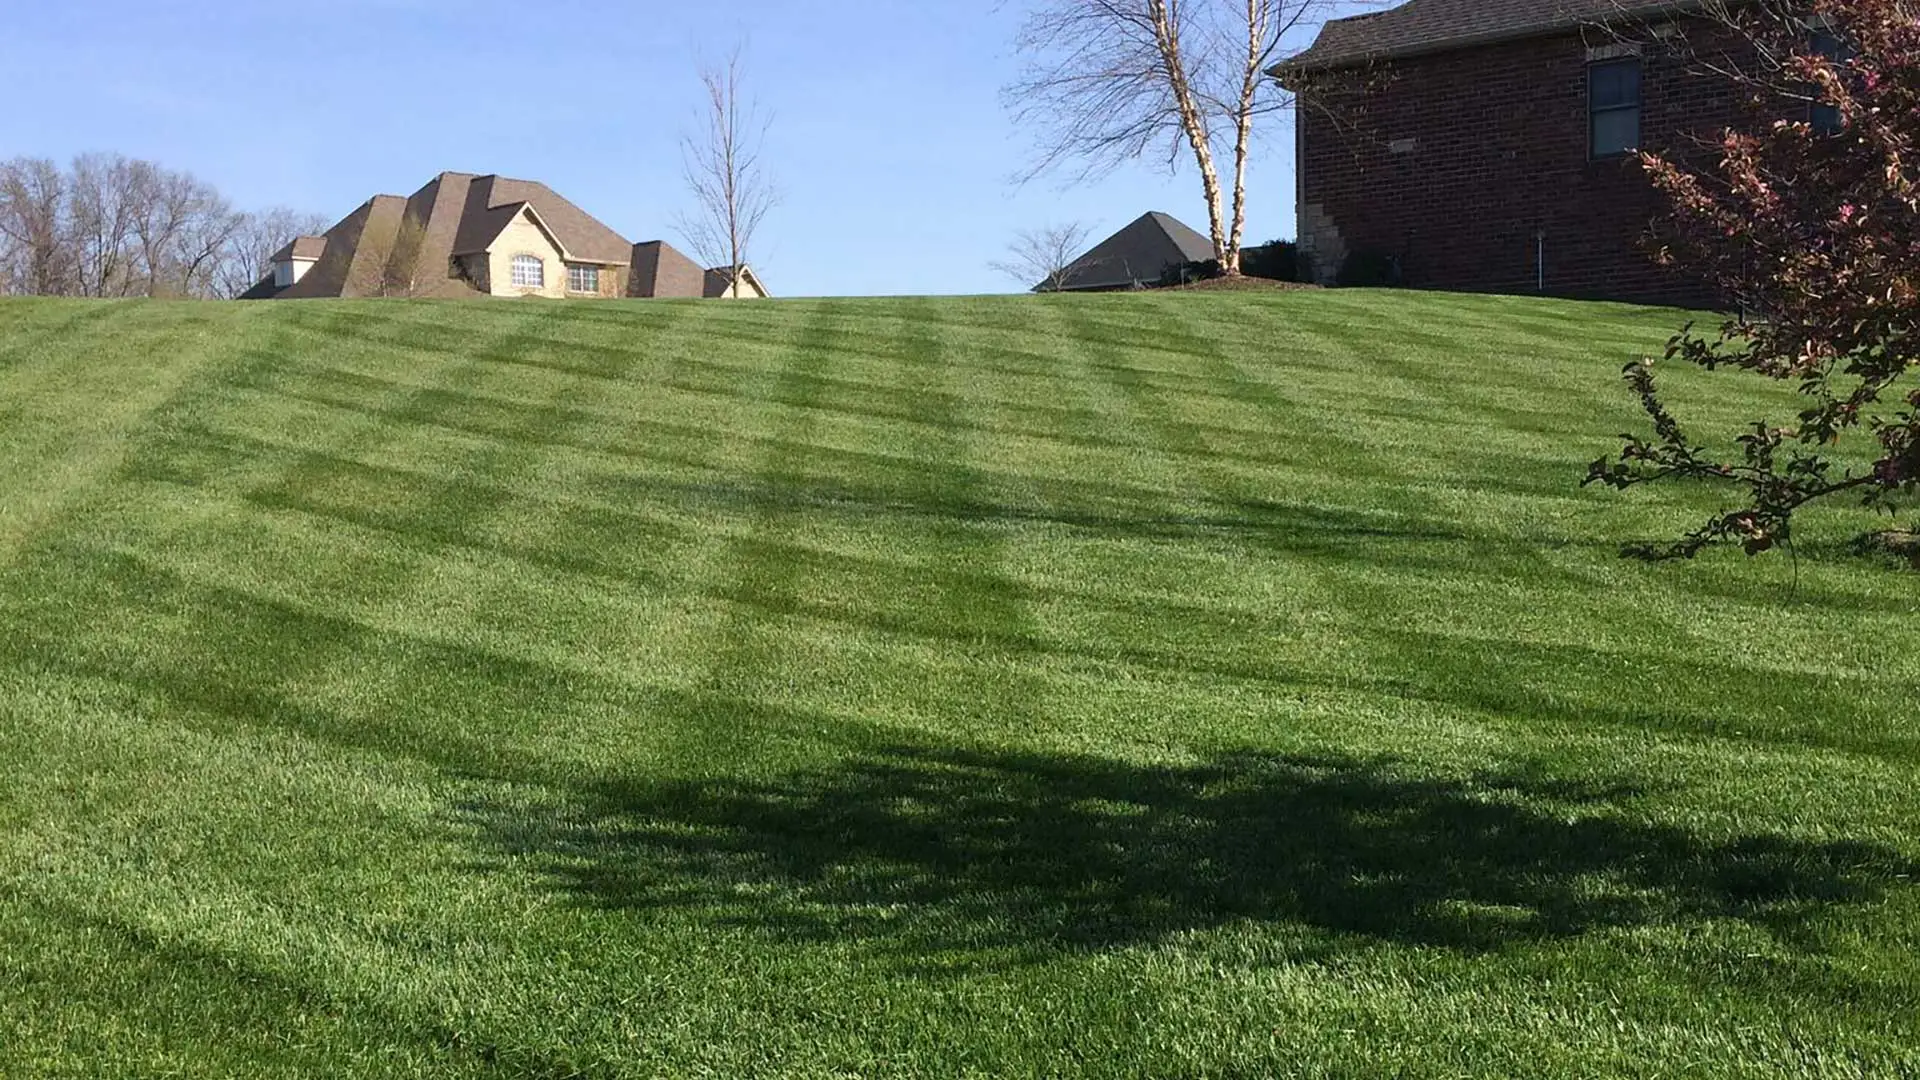 Well fertilized lawn on a home property in Smithton, IL.